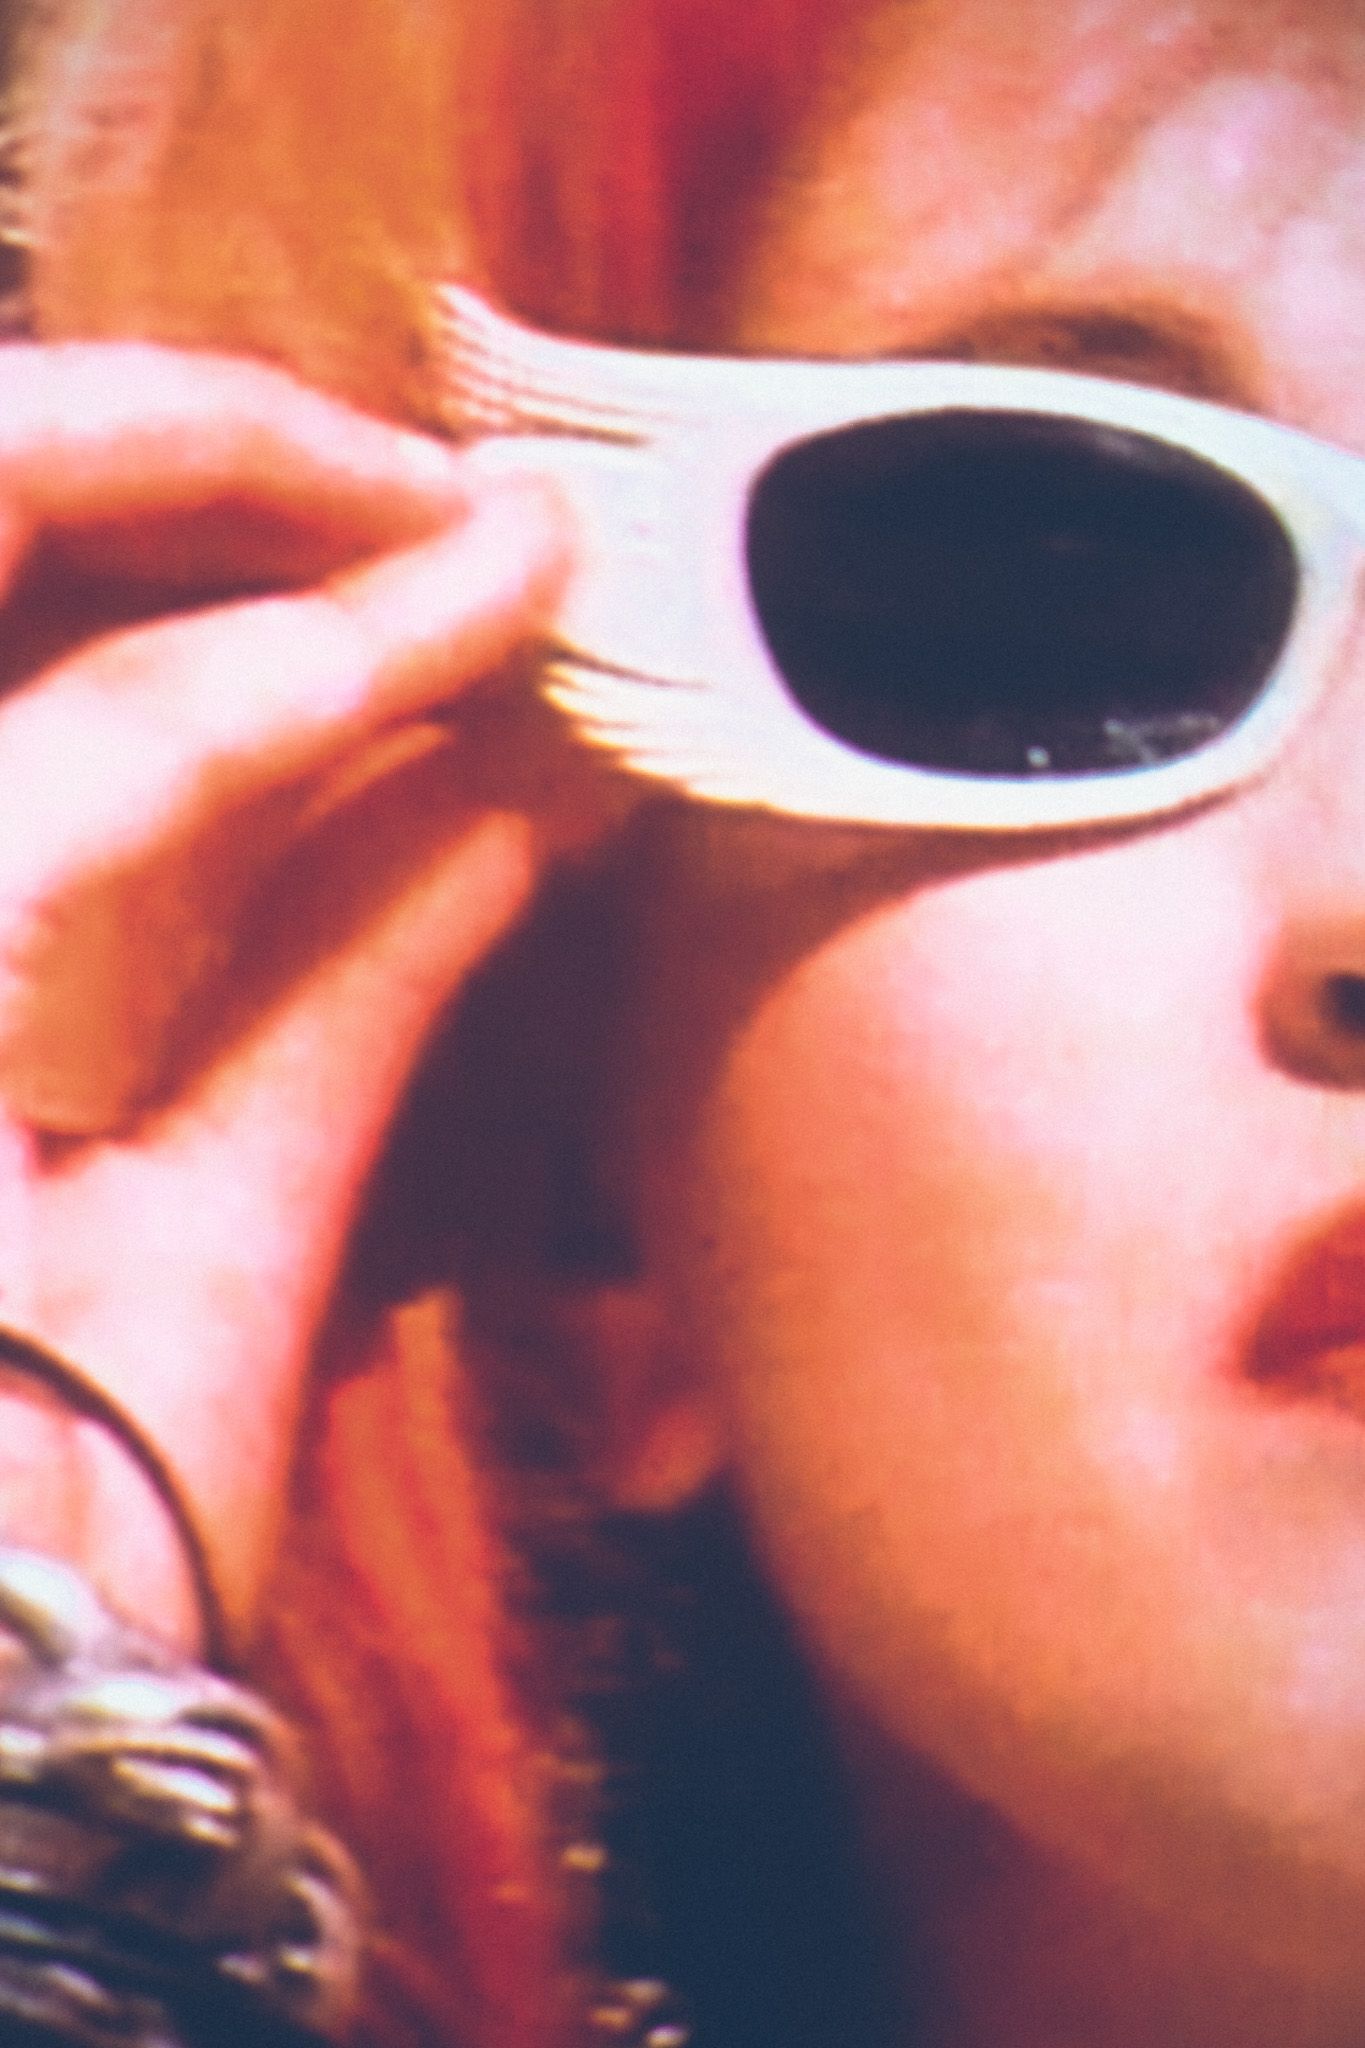 A closeup crop of Cyndi Lauper’s video for Girls Just Want to Have Fun, showing half of her face as she puts on white rimmed sunglasses.